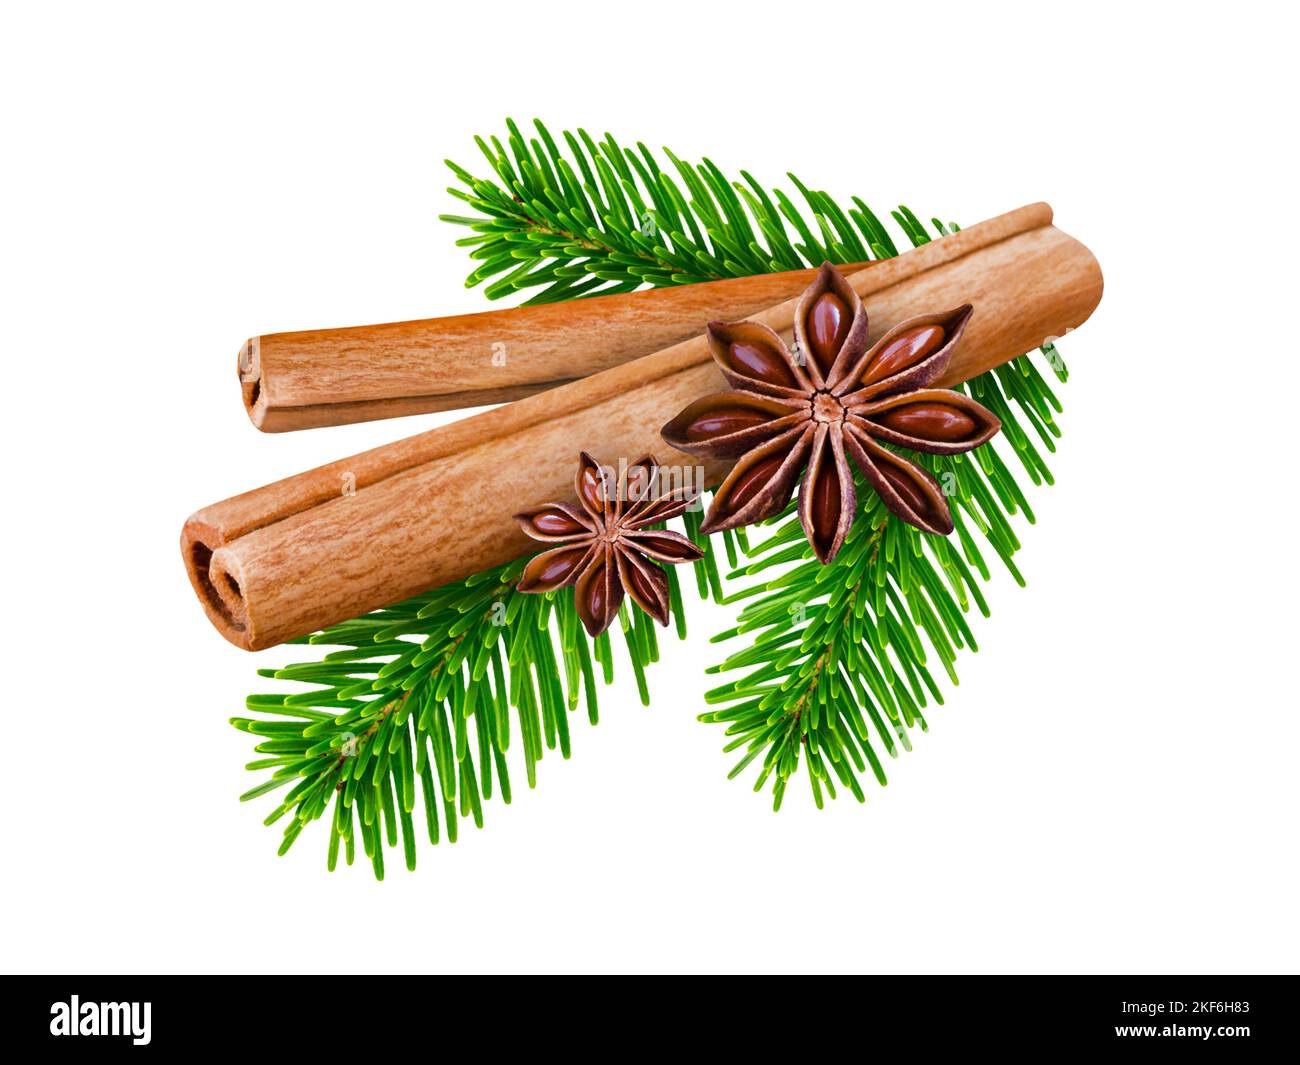 Cinnamon sticks and star anise with fir branches isolated on white background Stock Photo